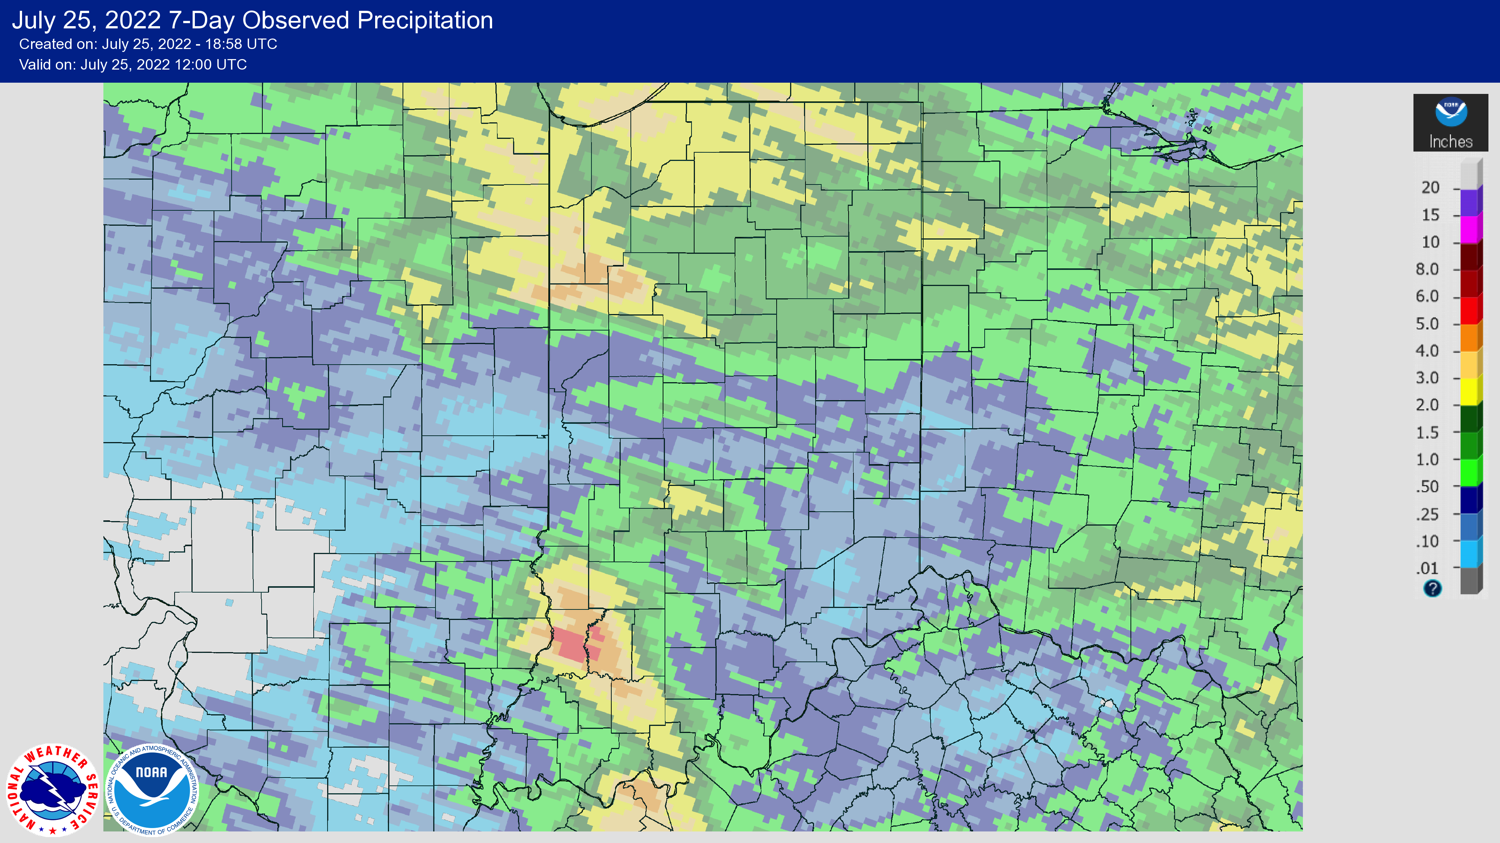 7-day observed rainfall